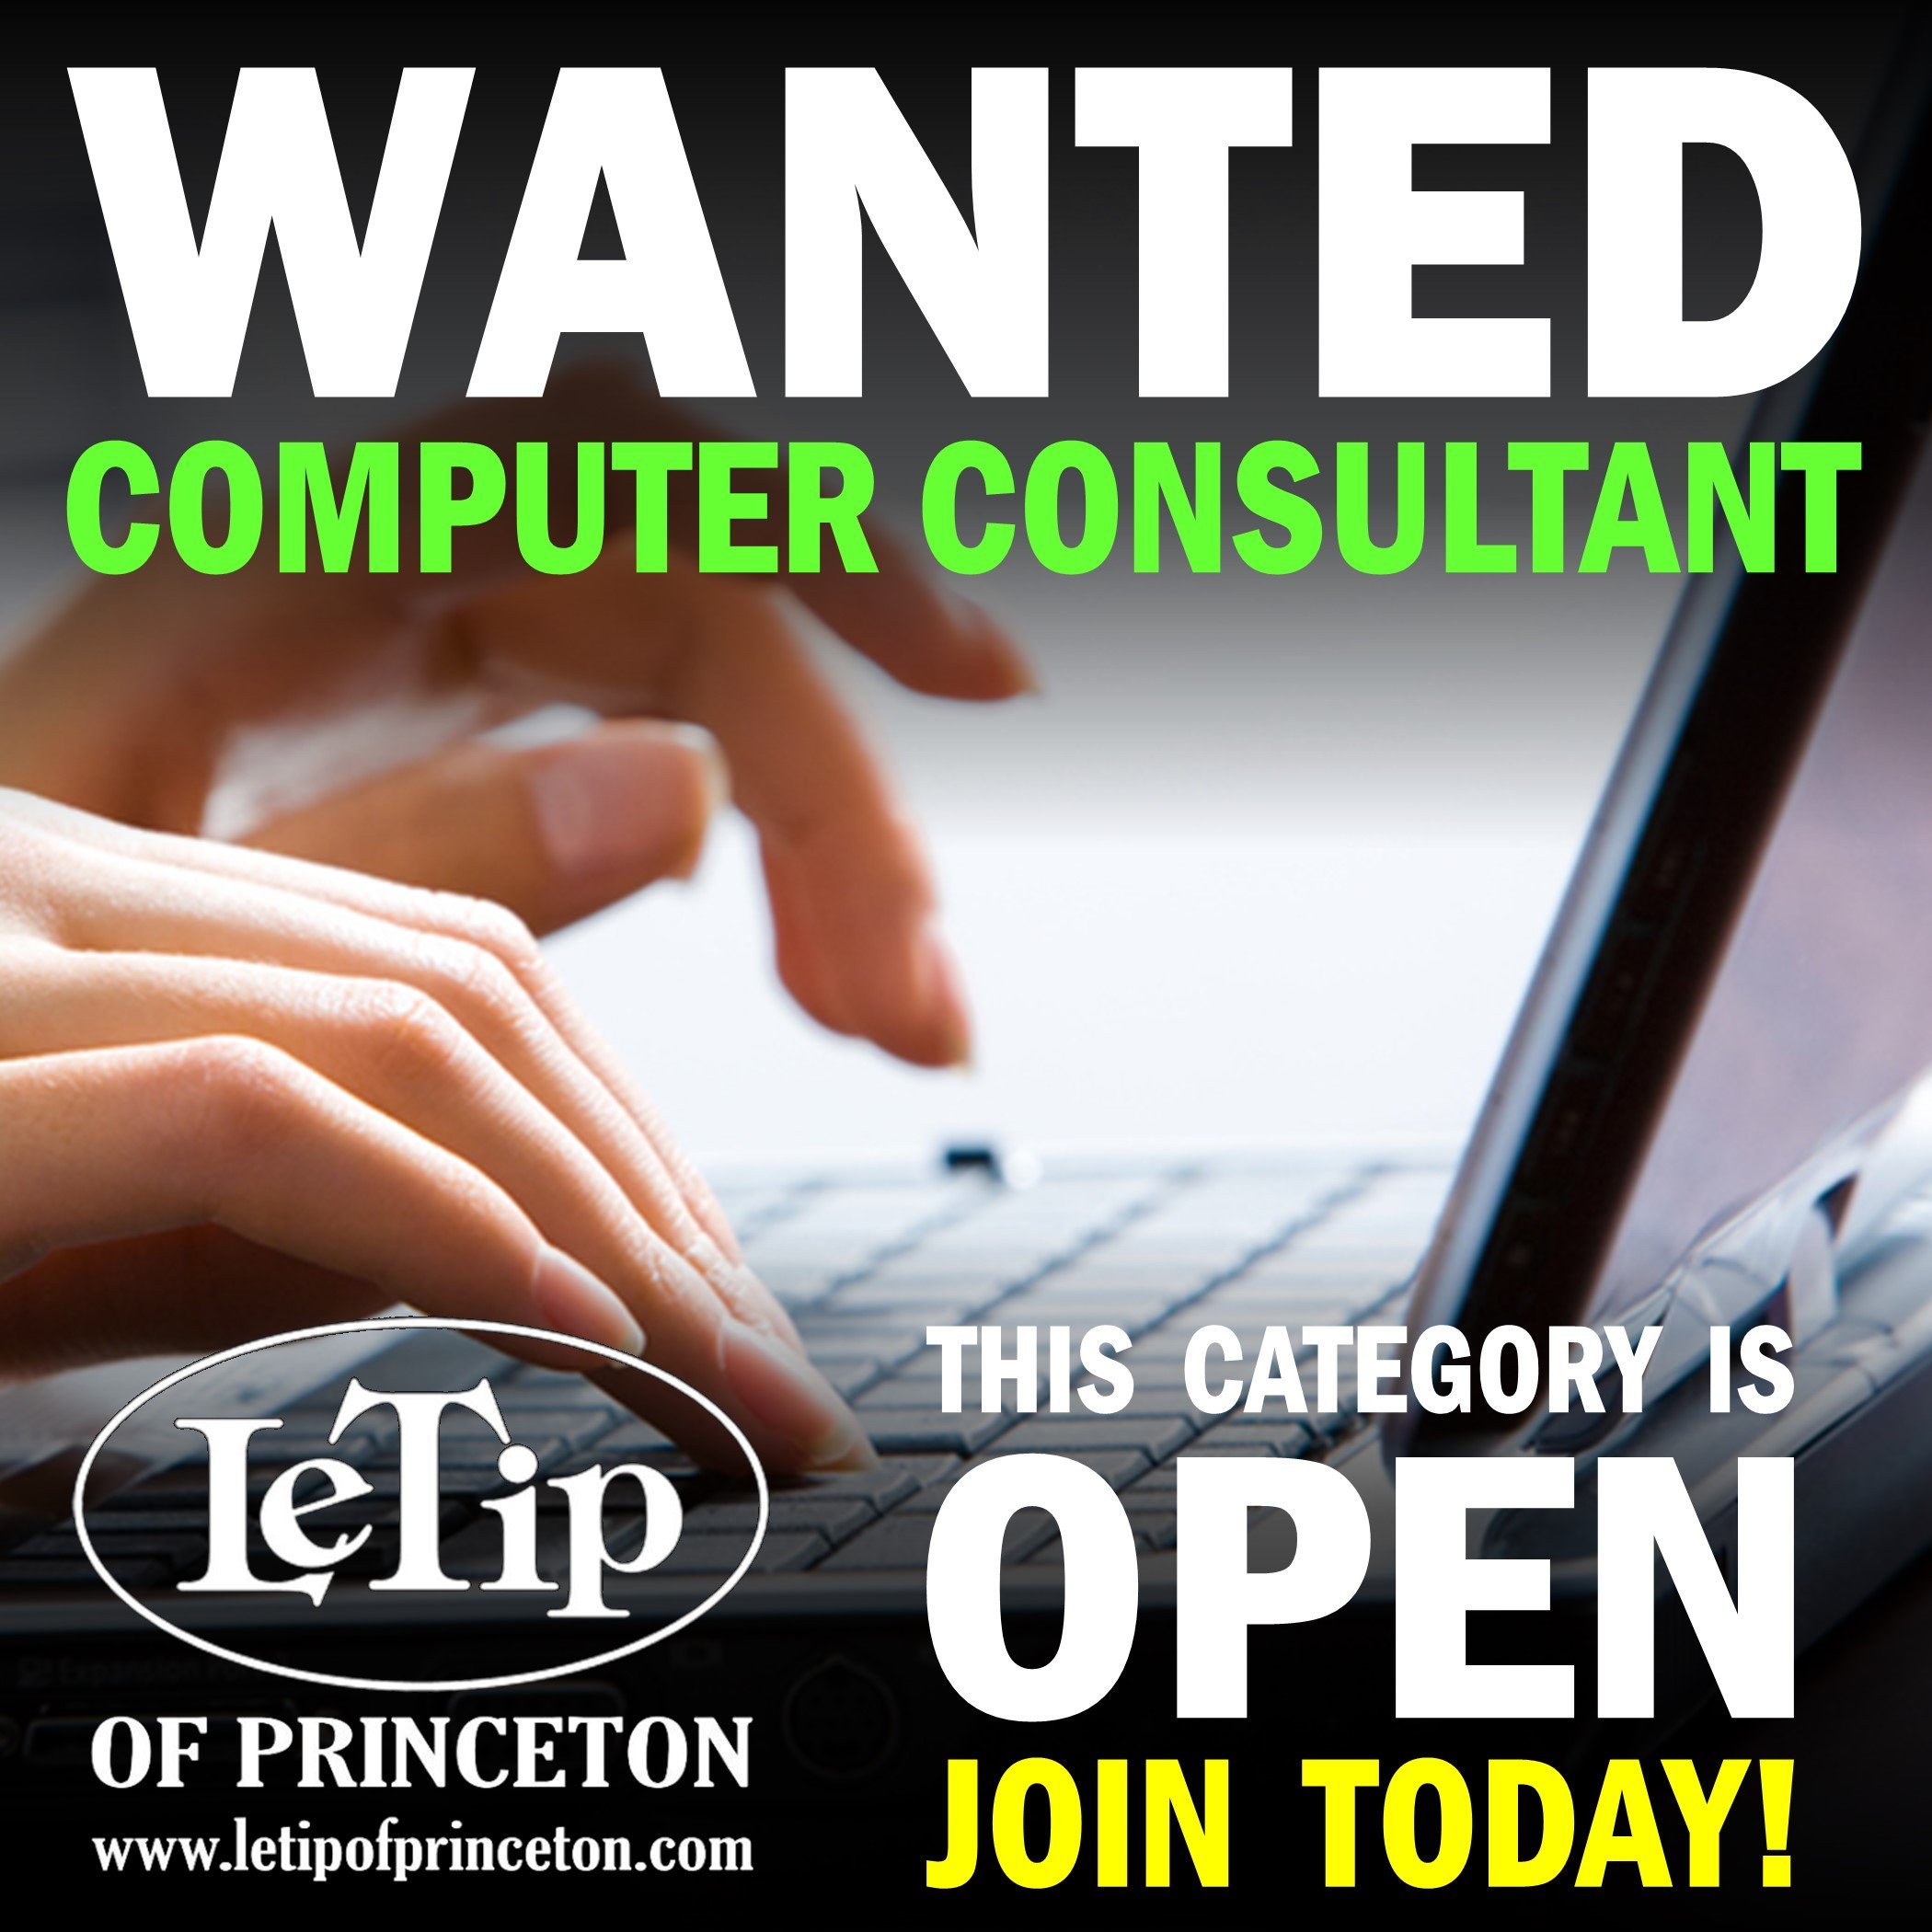 Wanted-ComputerConsultant-v2-1.jpg